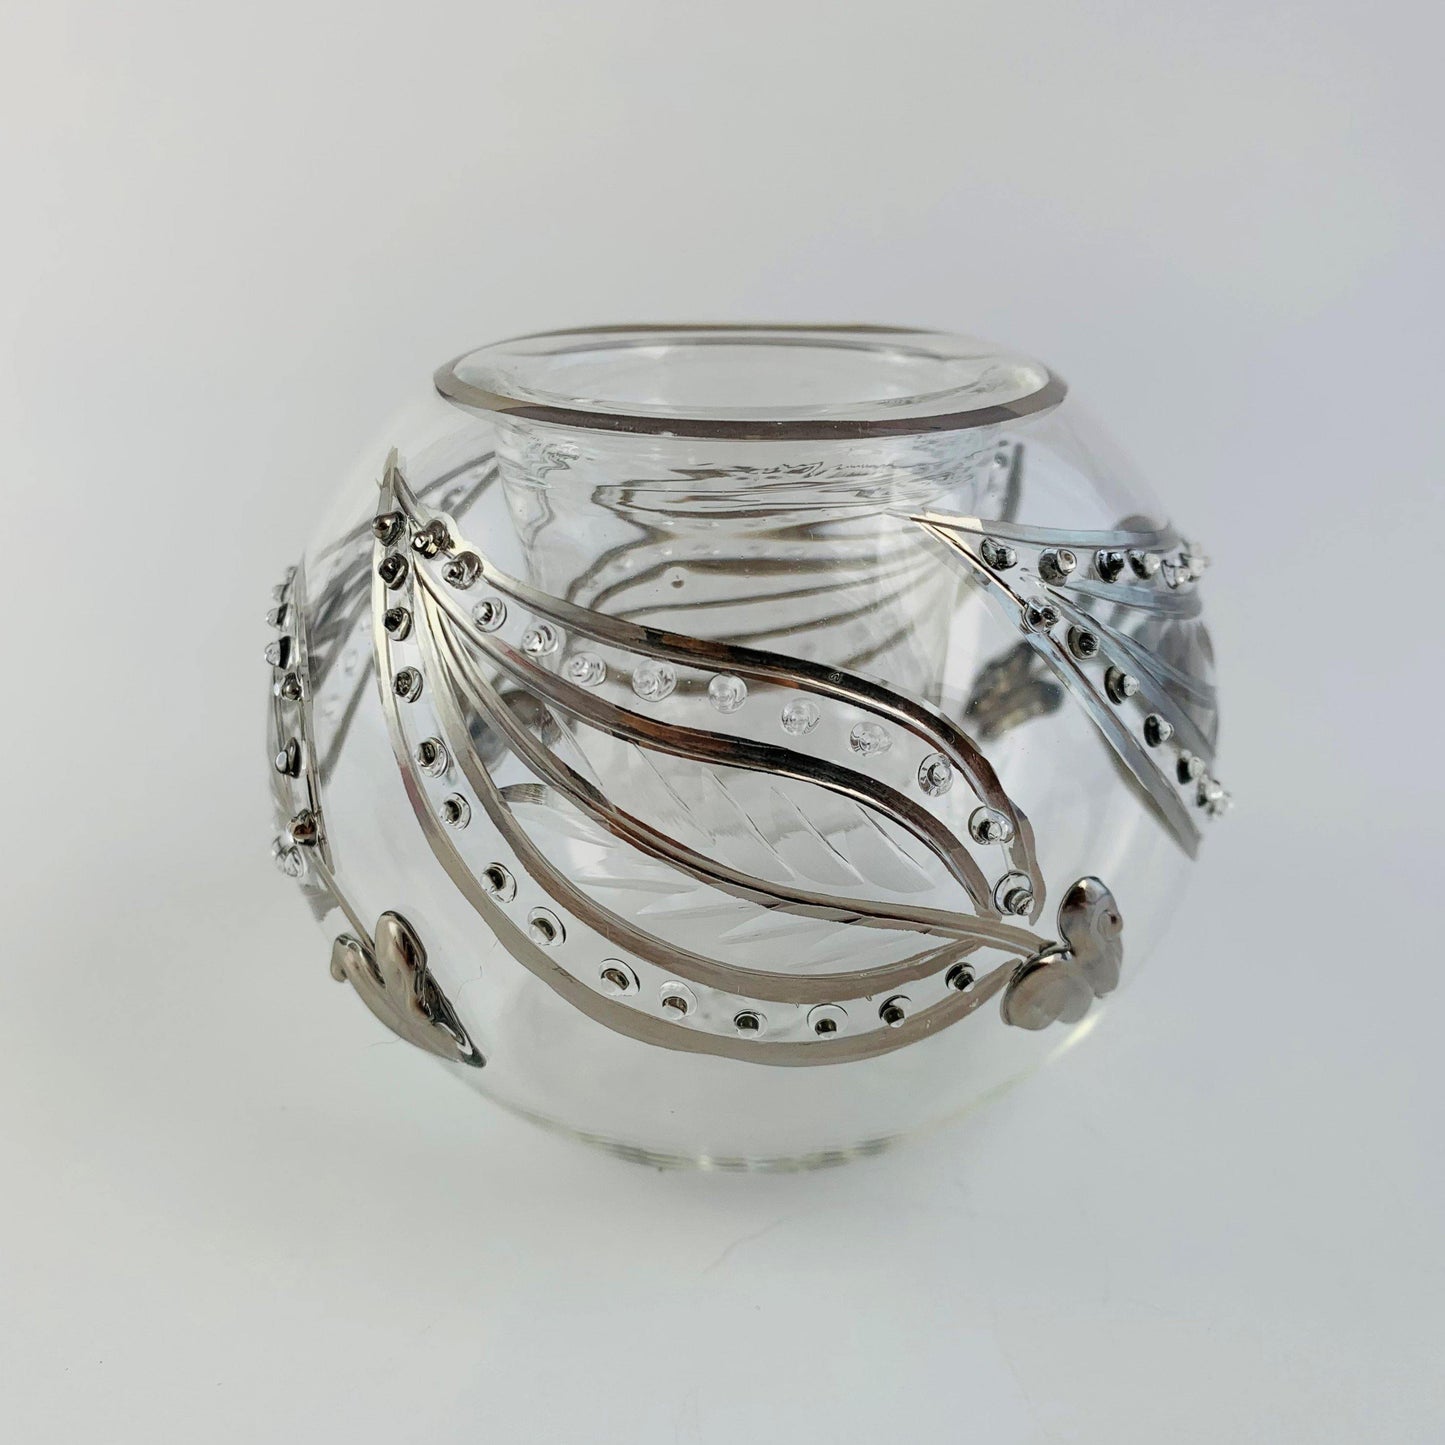 Blown Glass Candle Holder - Silver Paisley